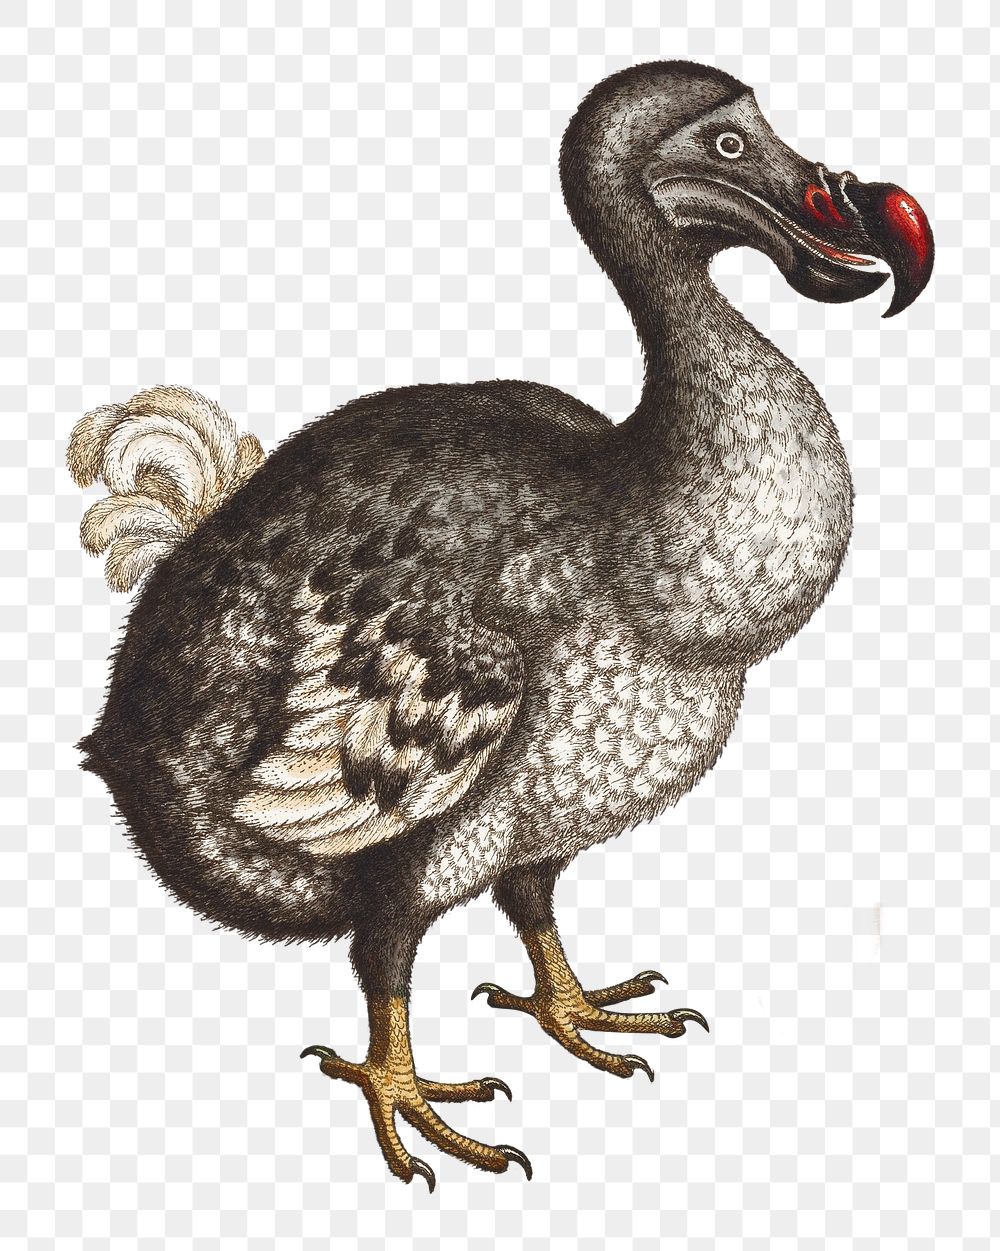 PNG Dodo bird, vintage extinct animal illustration by George Edwards, transparent background. Remixed by rawpixel.